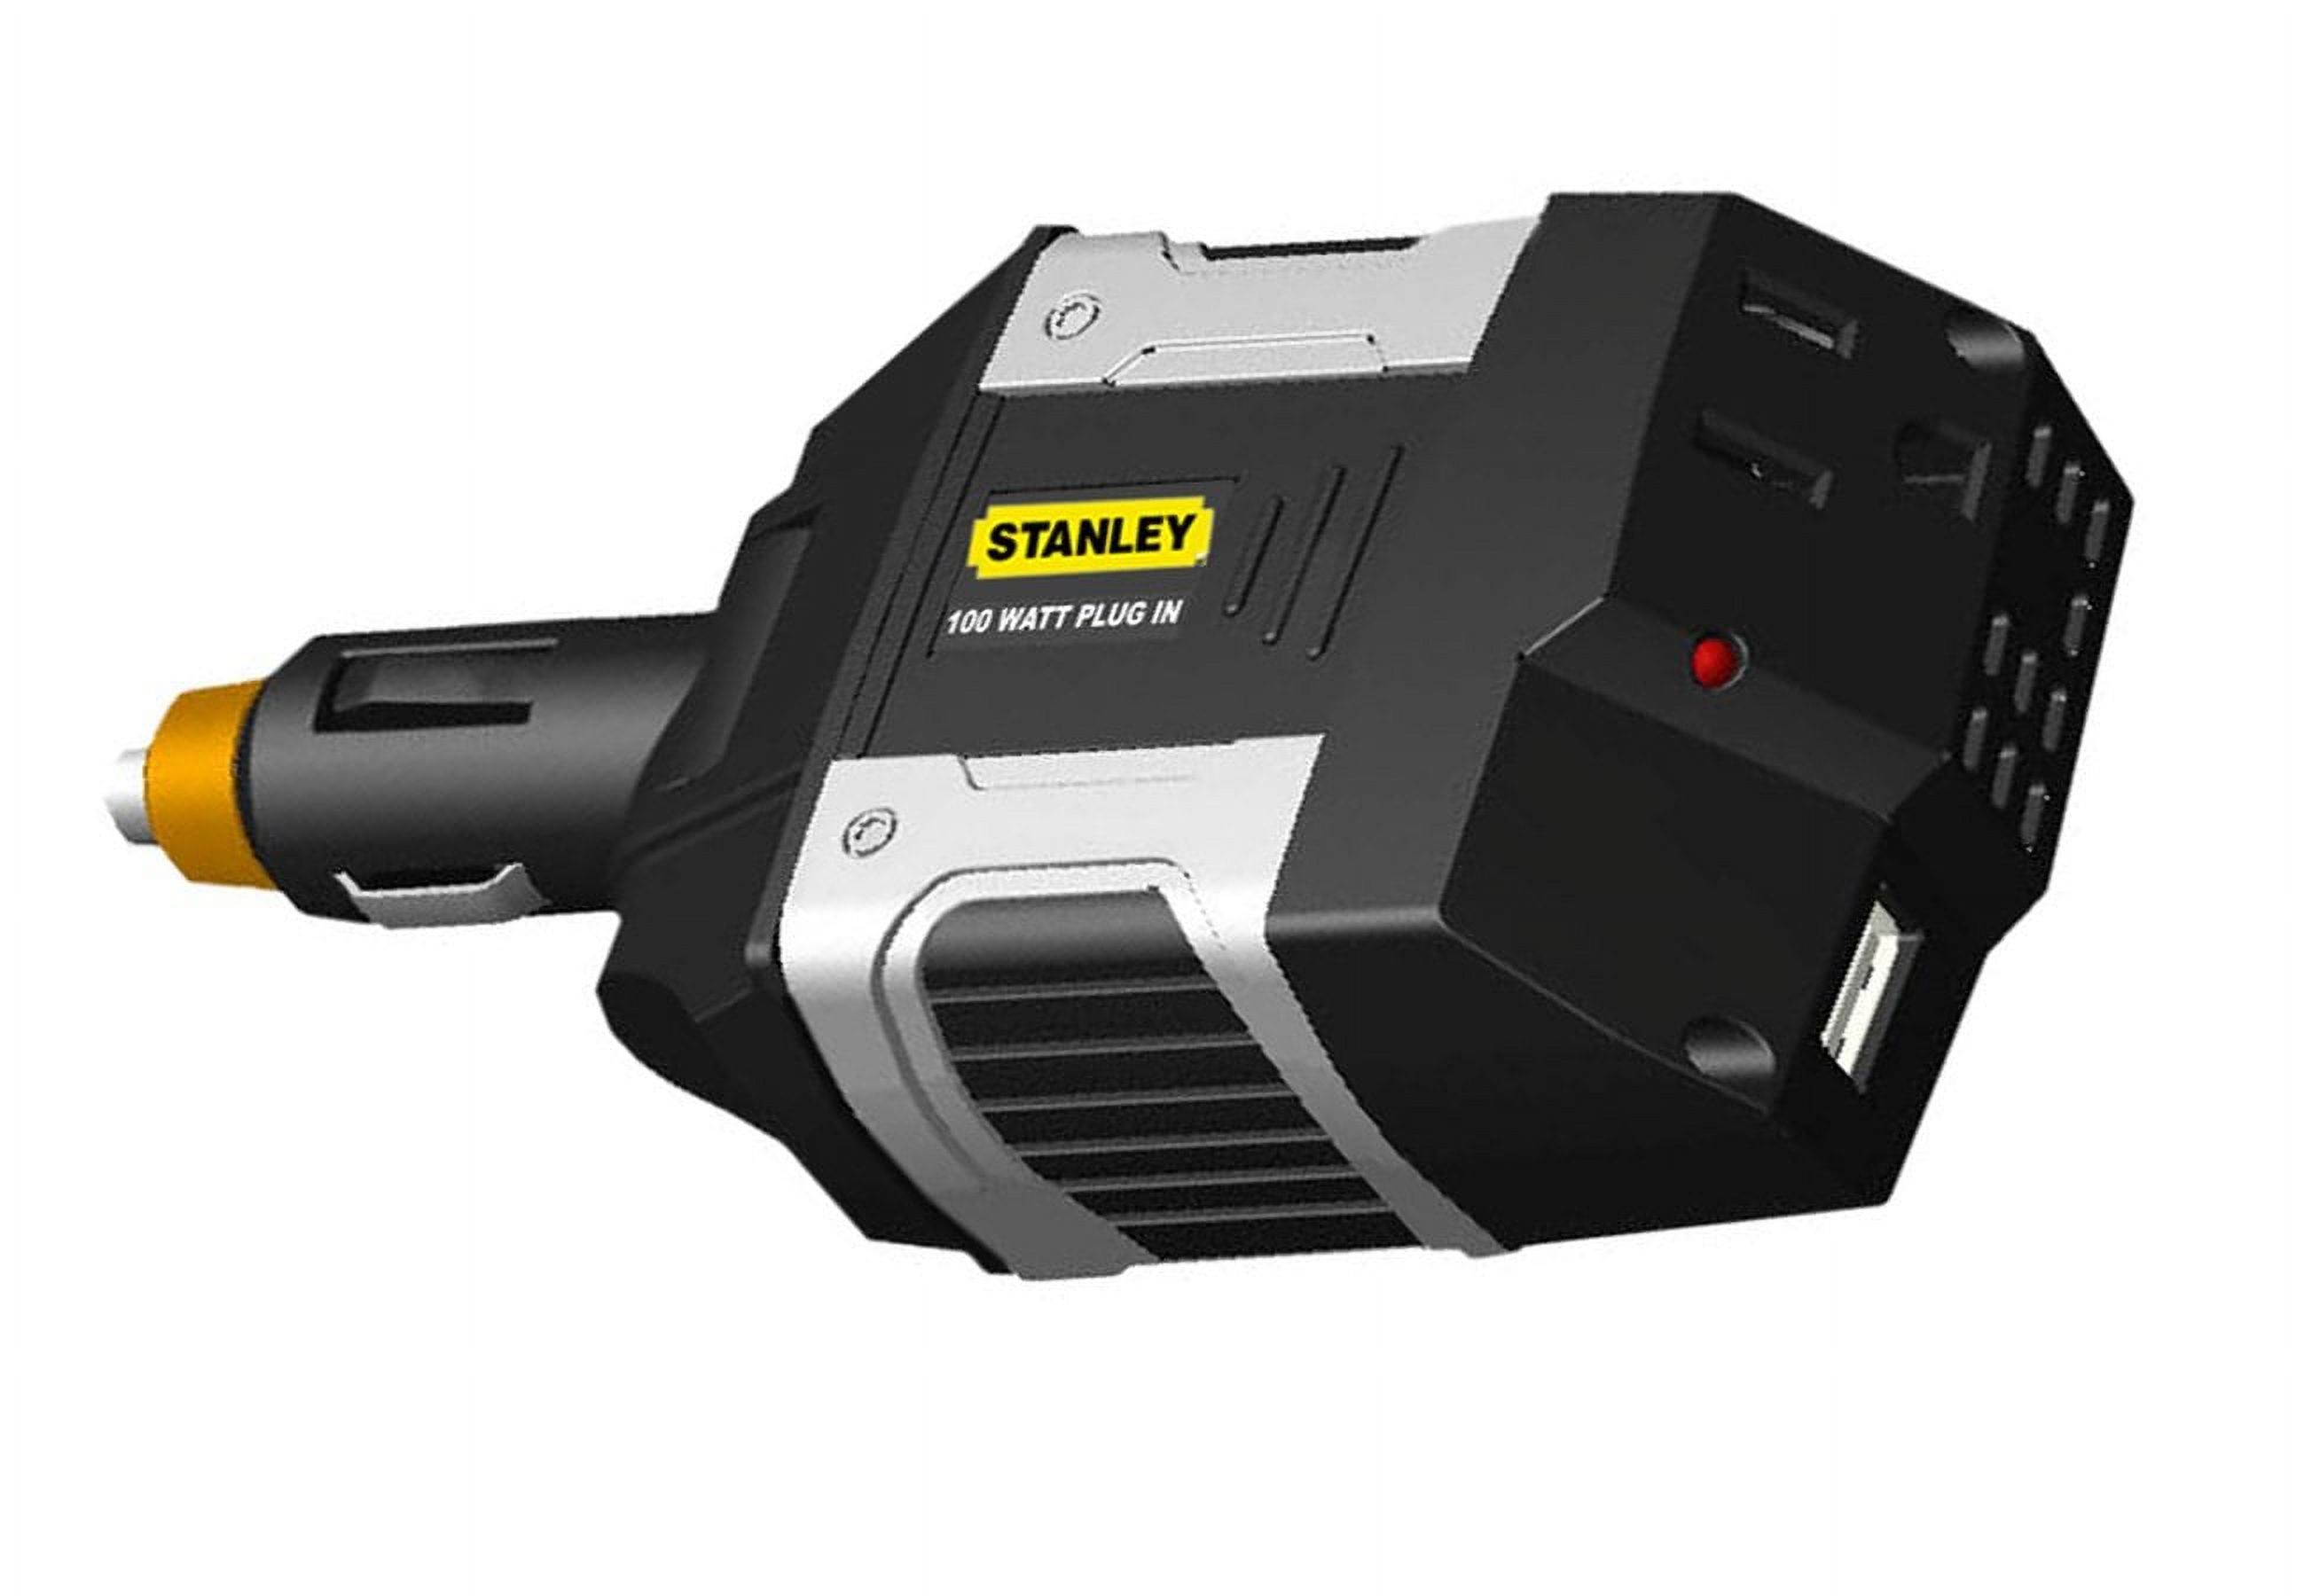 STANLEY PC1A09 100 Watt Power Inverter with USB Power Outlet - image 1 of 3